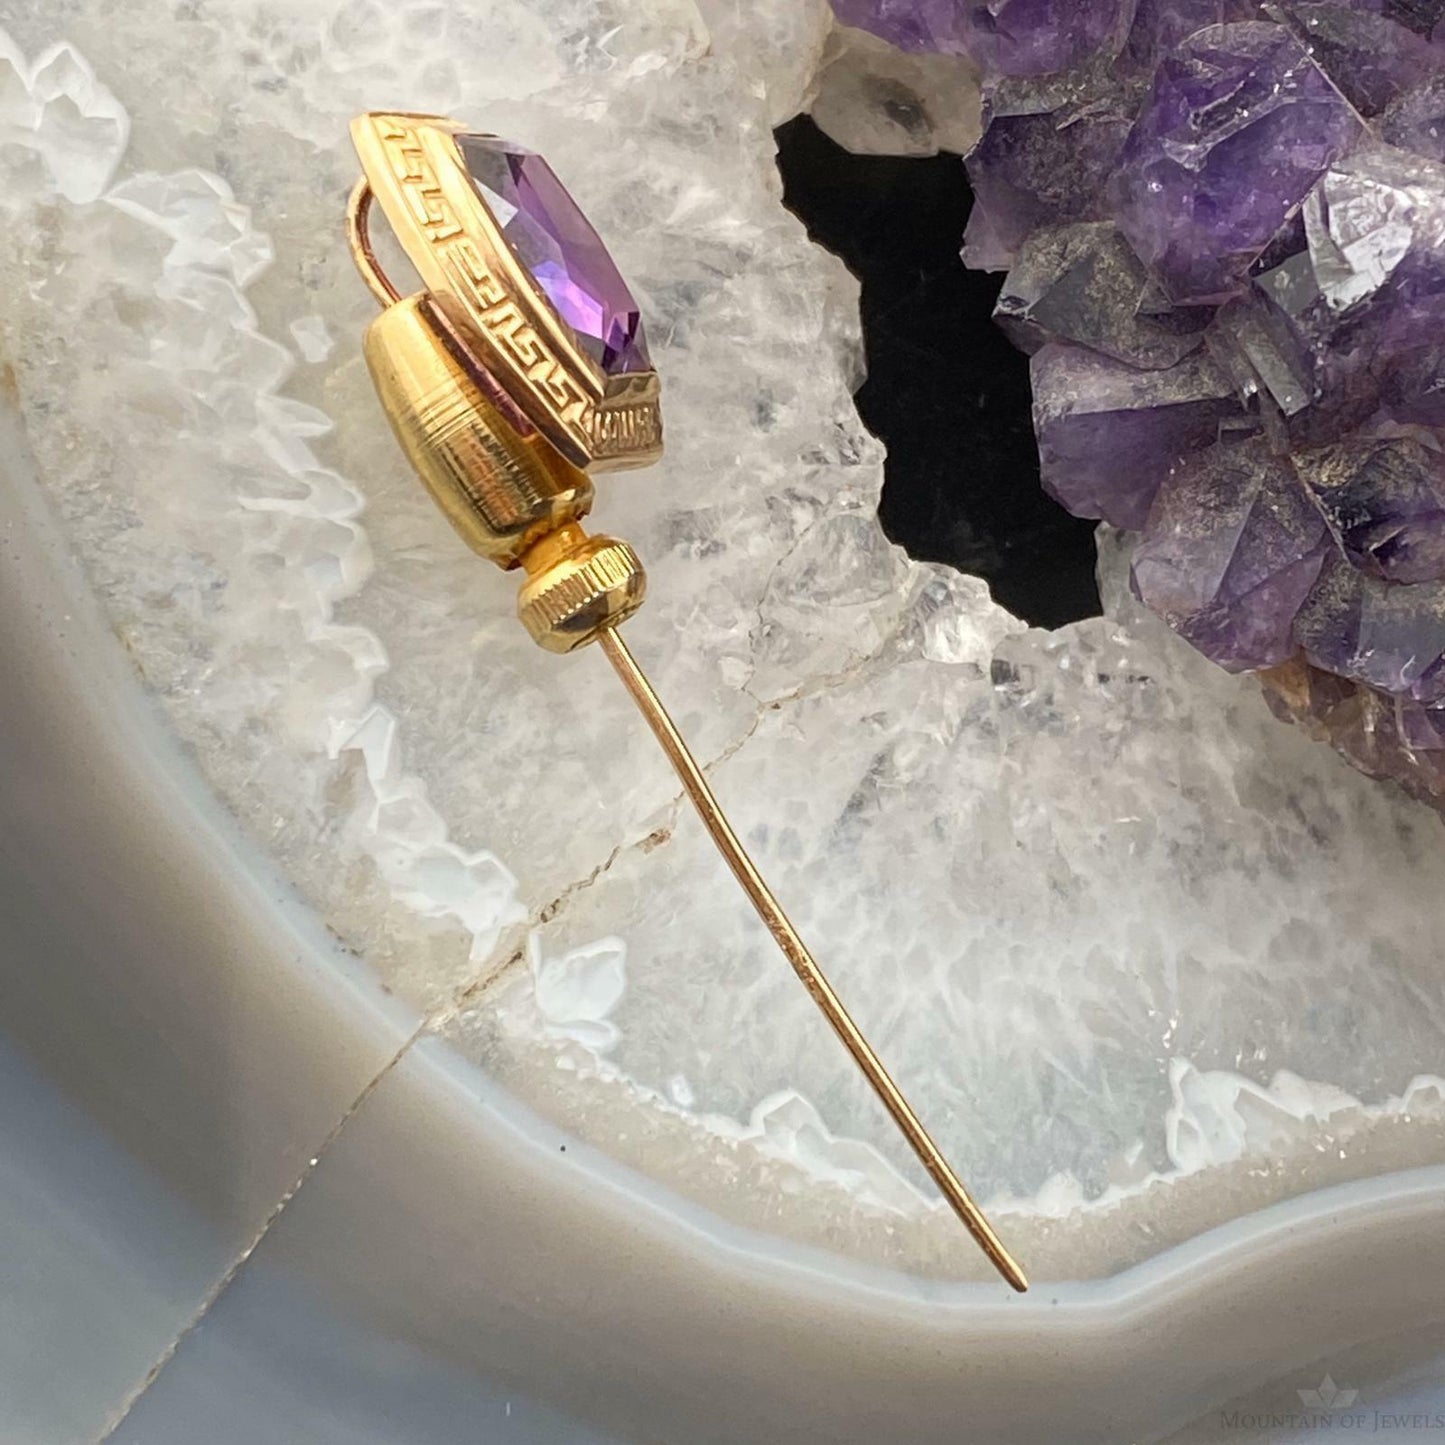 14K Yellow Gold 1963 Immaculate Collage Amethyst Pin Collectible Item